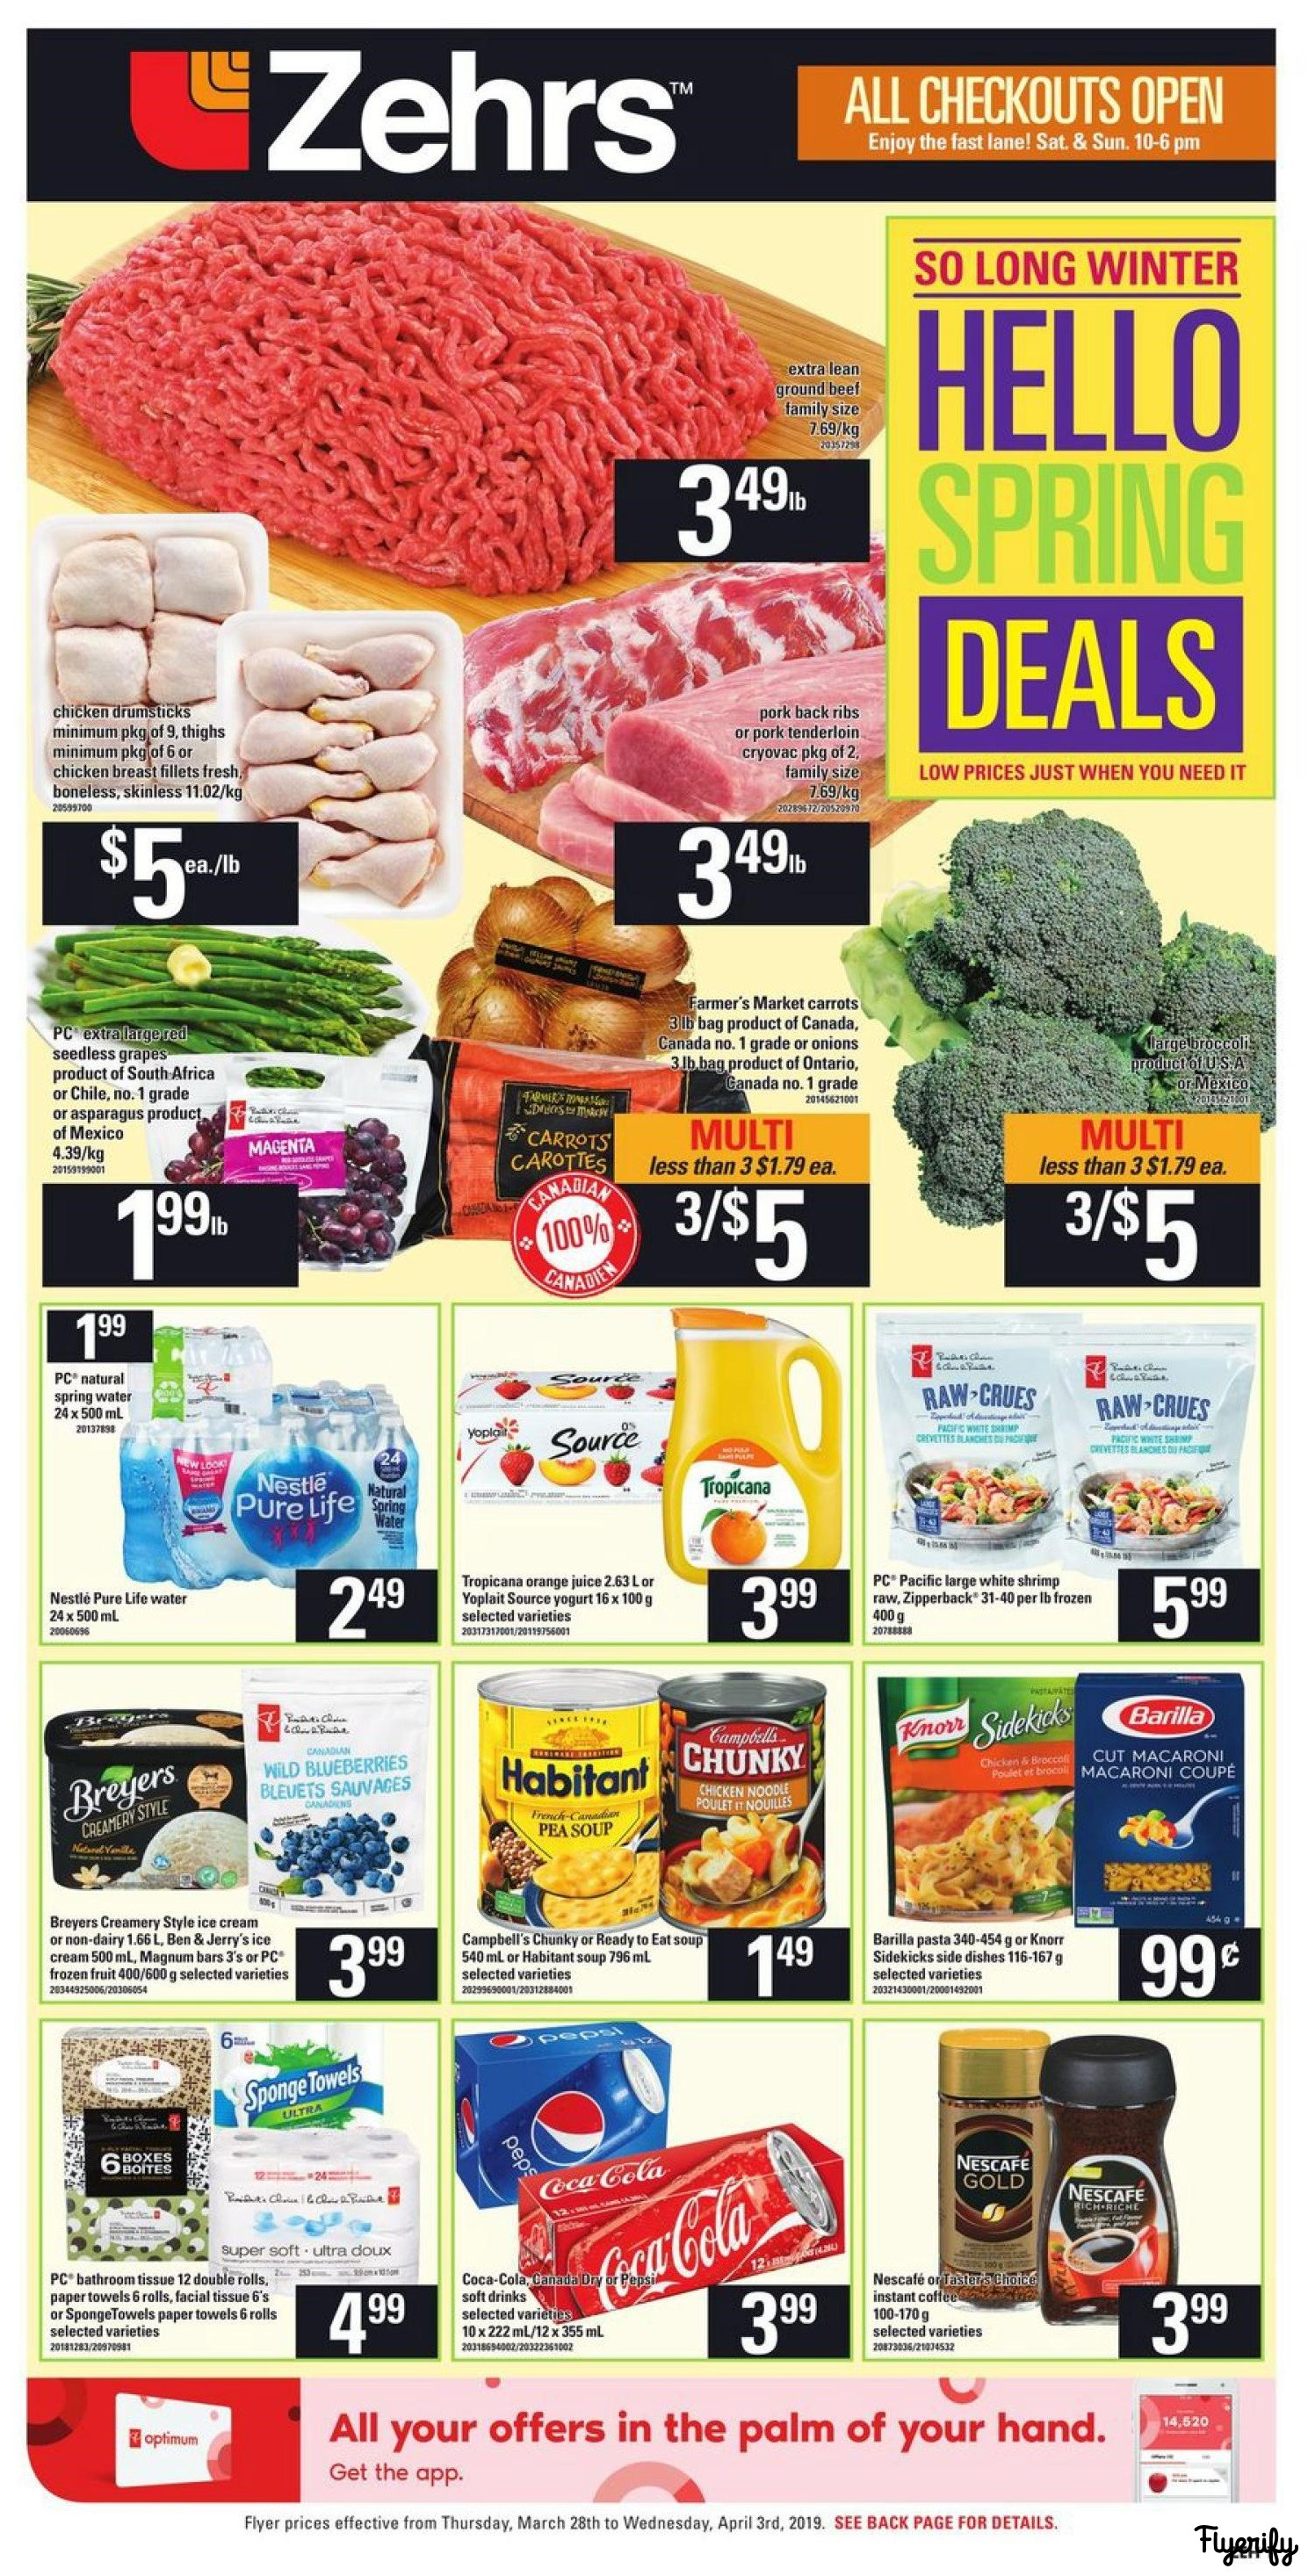 Zehrs Flyer March 28 To April 3 Canada within dimensions 1489 X 2933